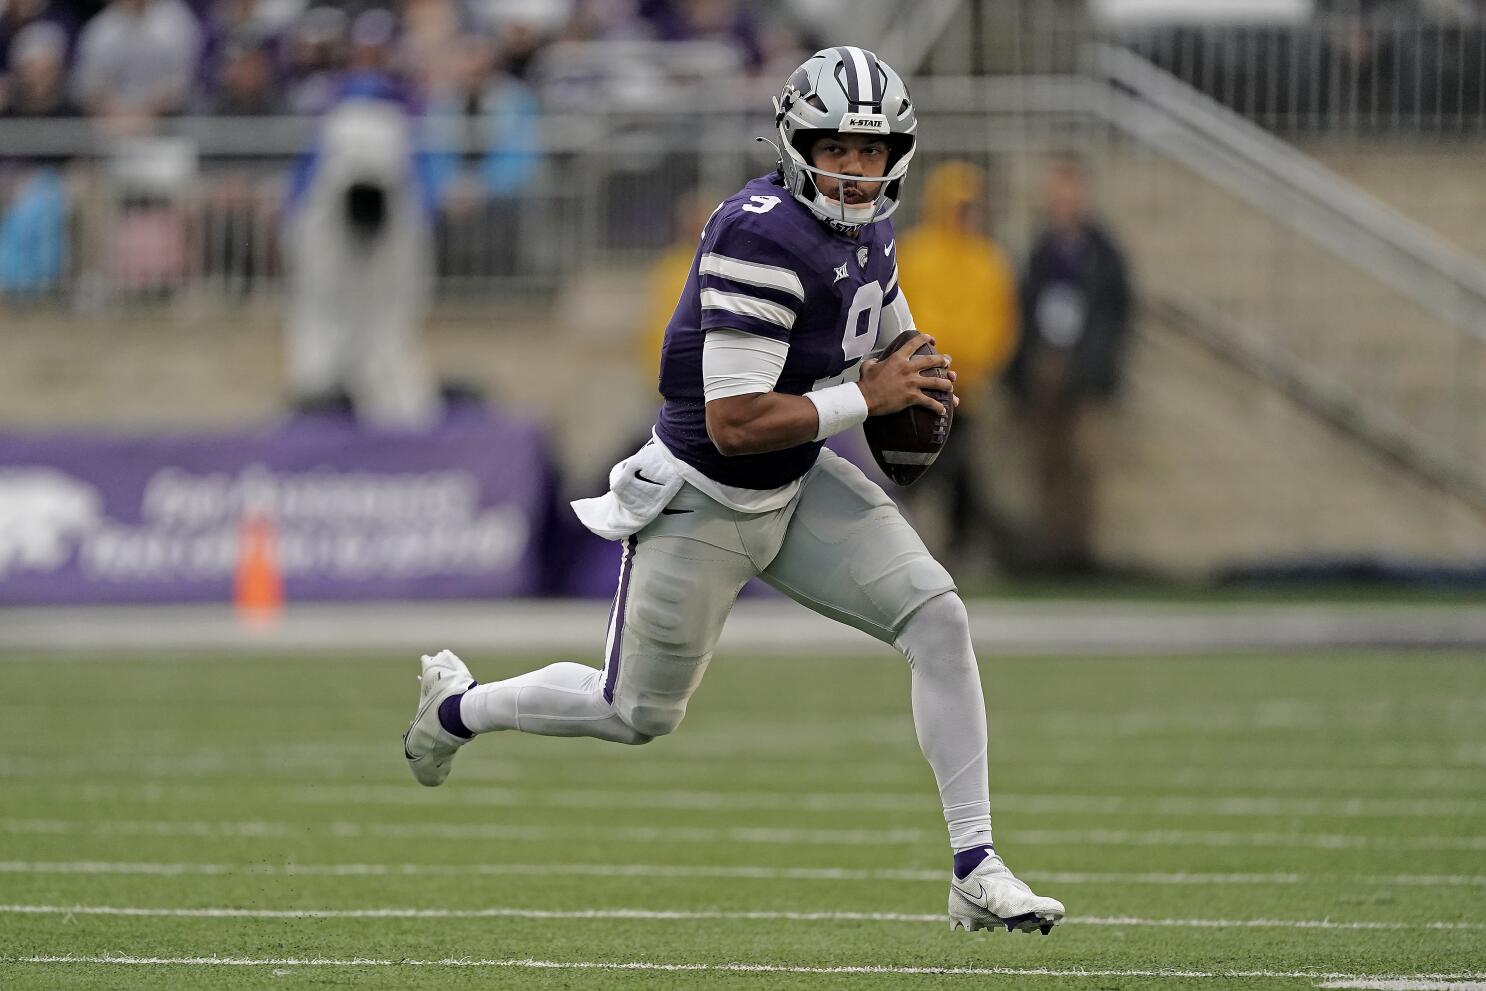 K-State blows out Mizzou 40-12 in first meeting since 2011